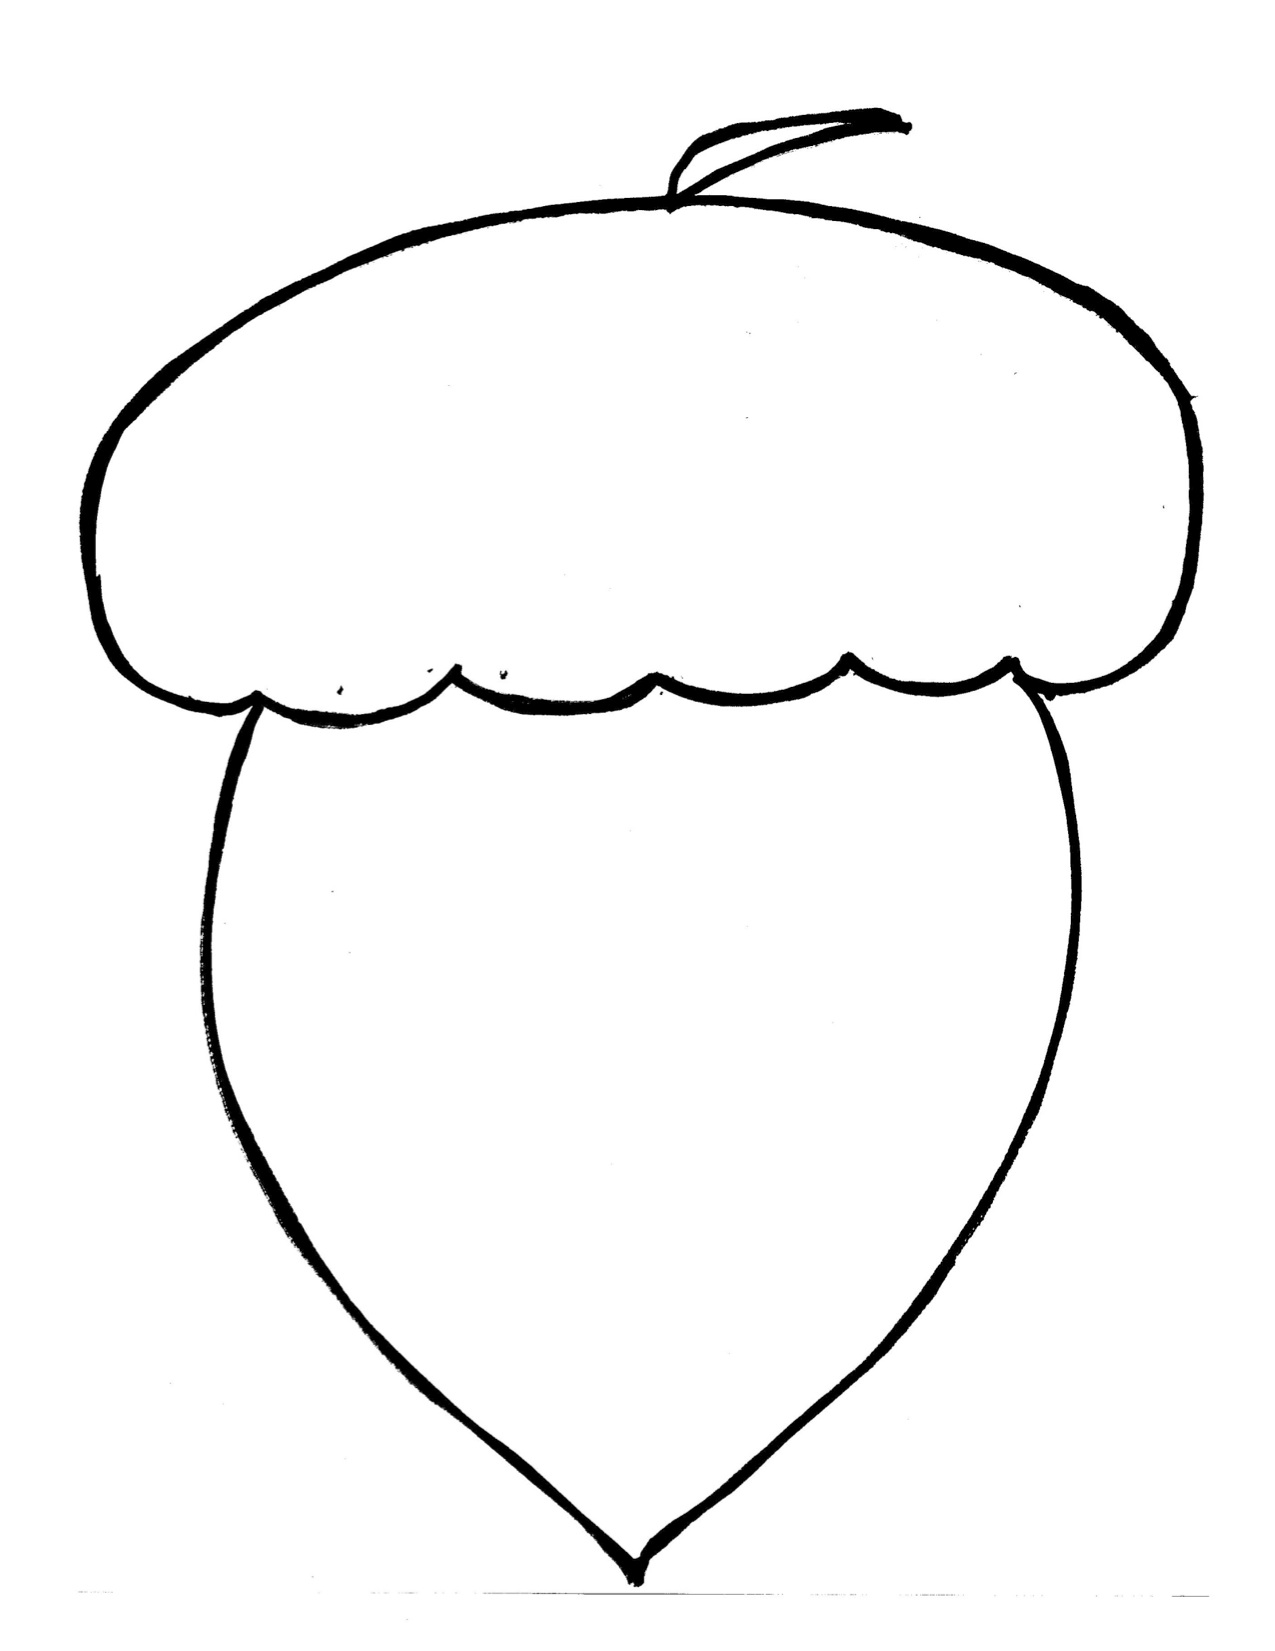 Picture Of An Acorn Nut ClipArt Best